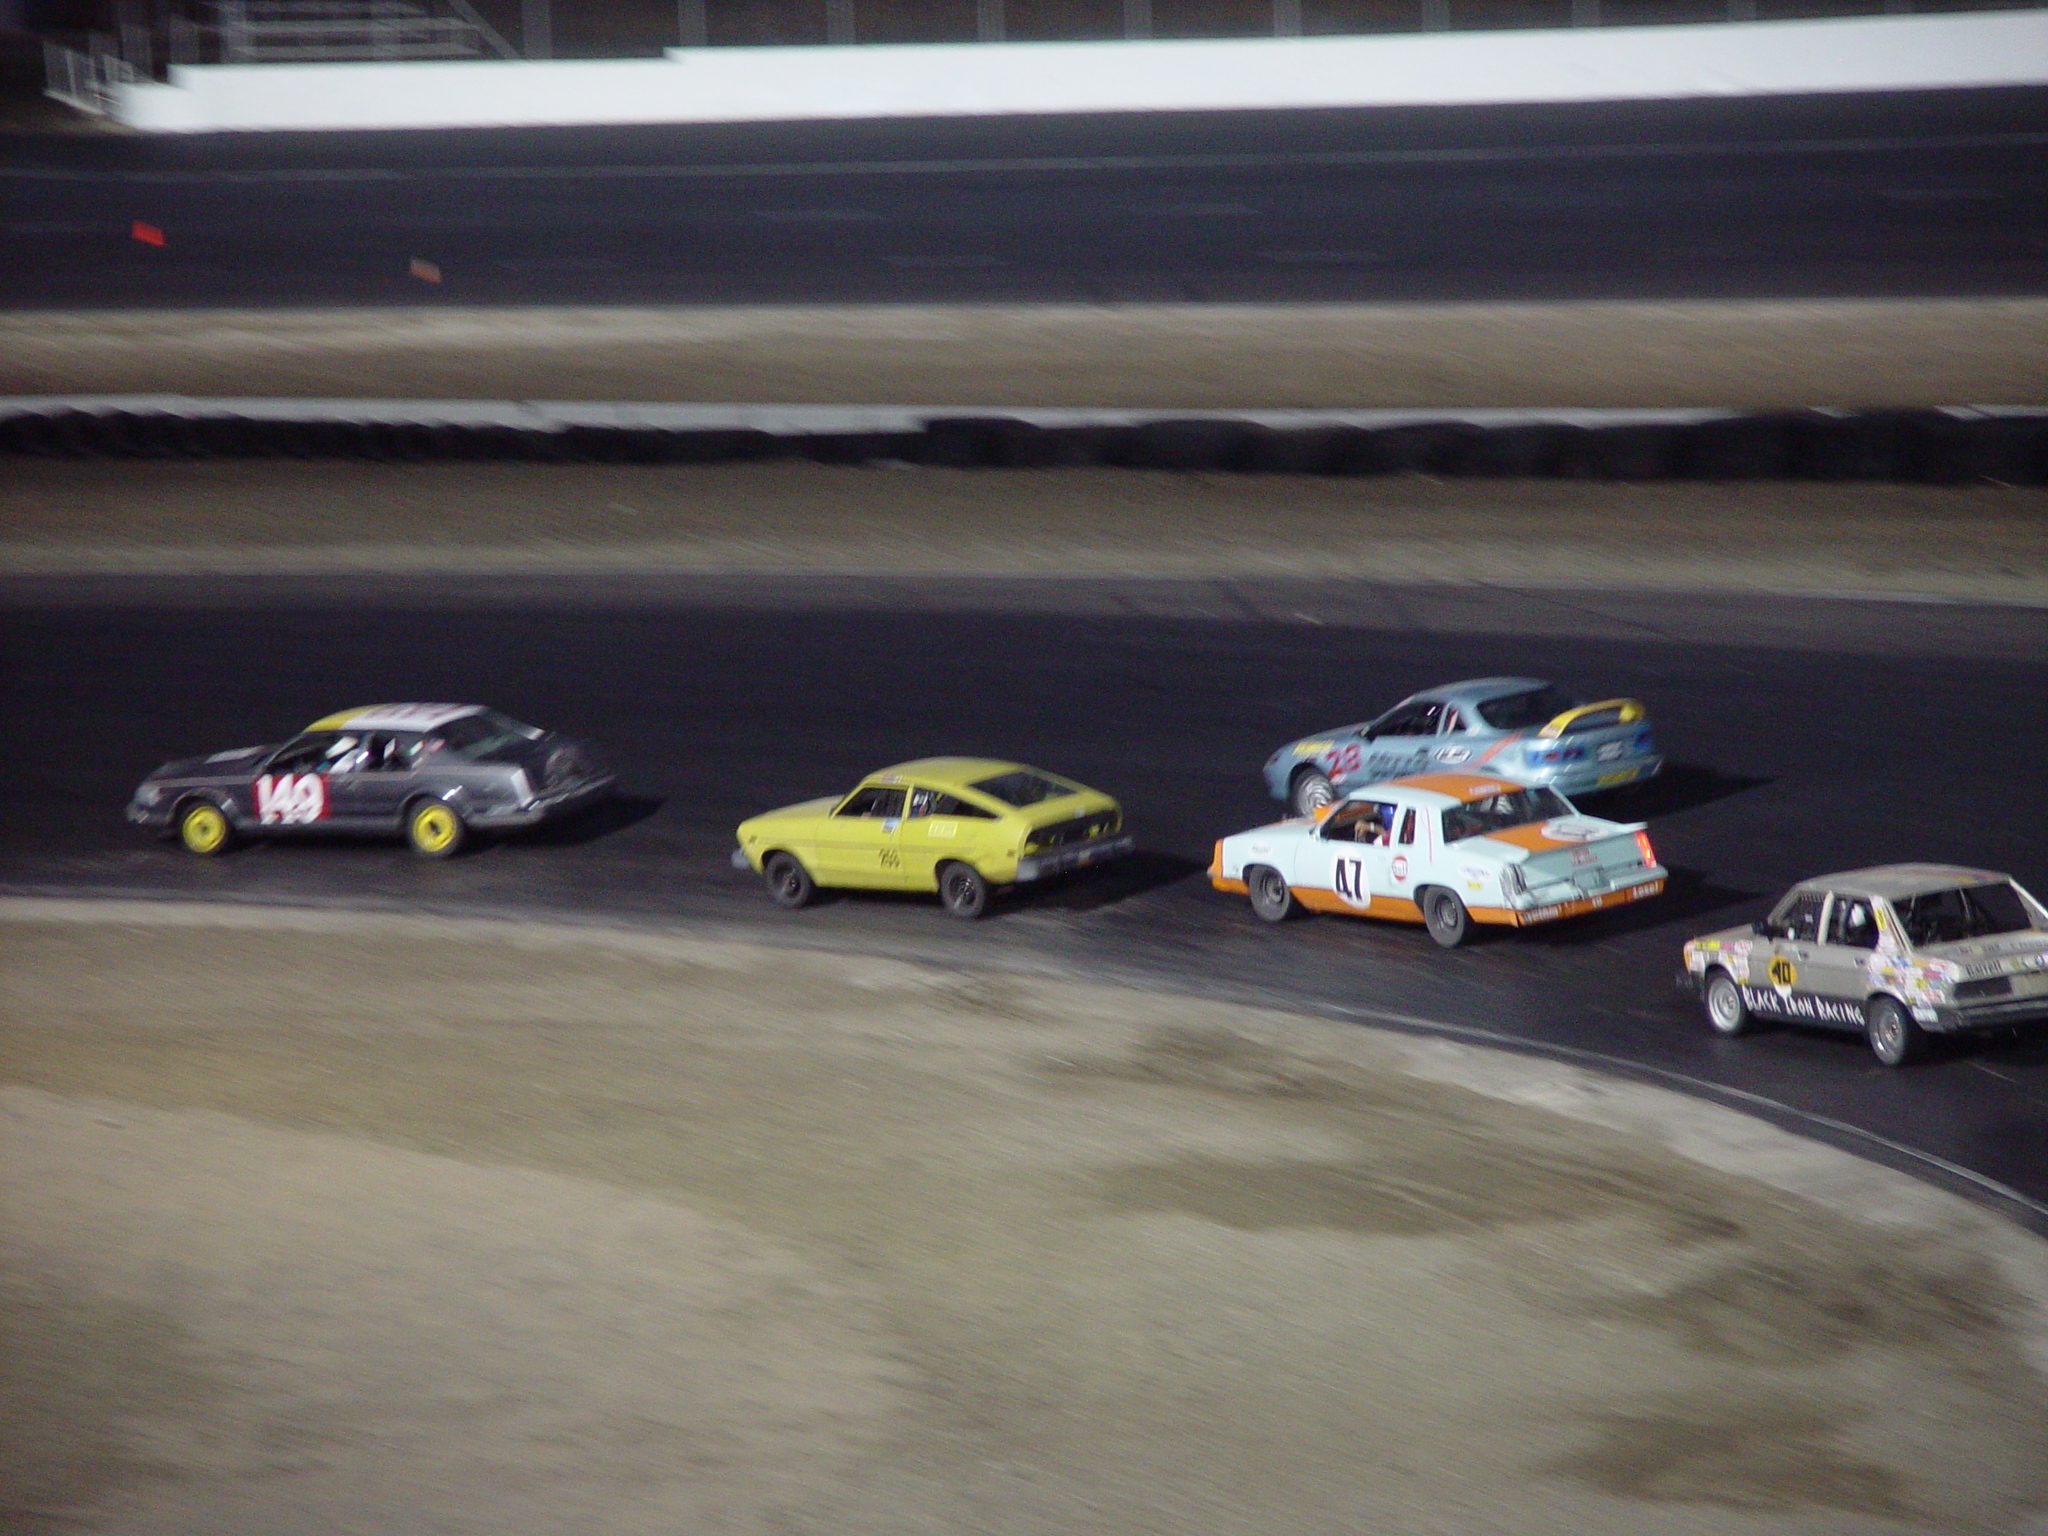 five cars racing through a track at the same time